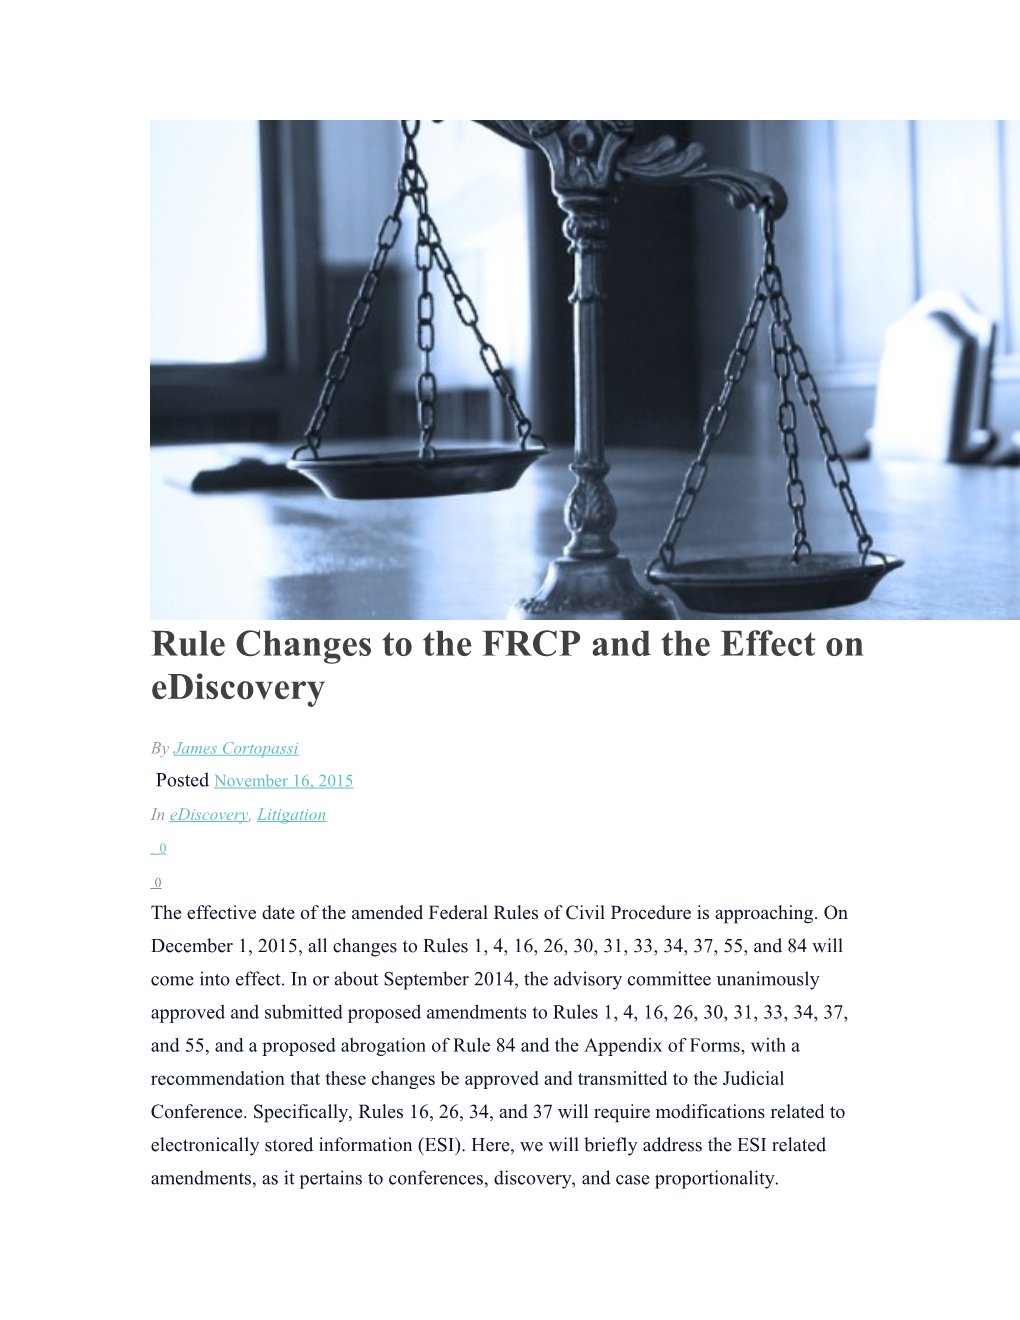 Rule Changes to the FRCP and the Effect on Ediscovery